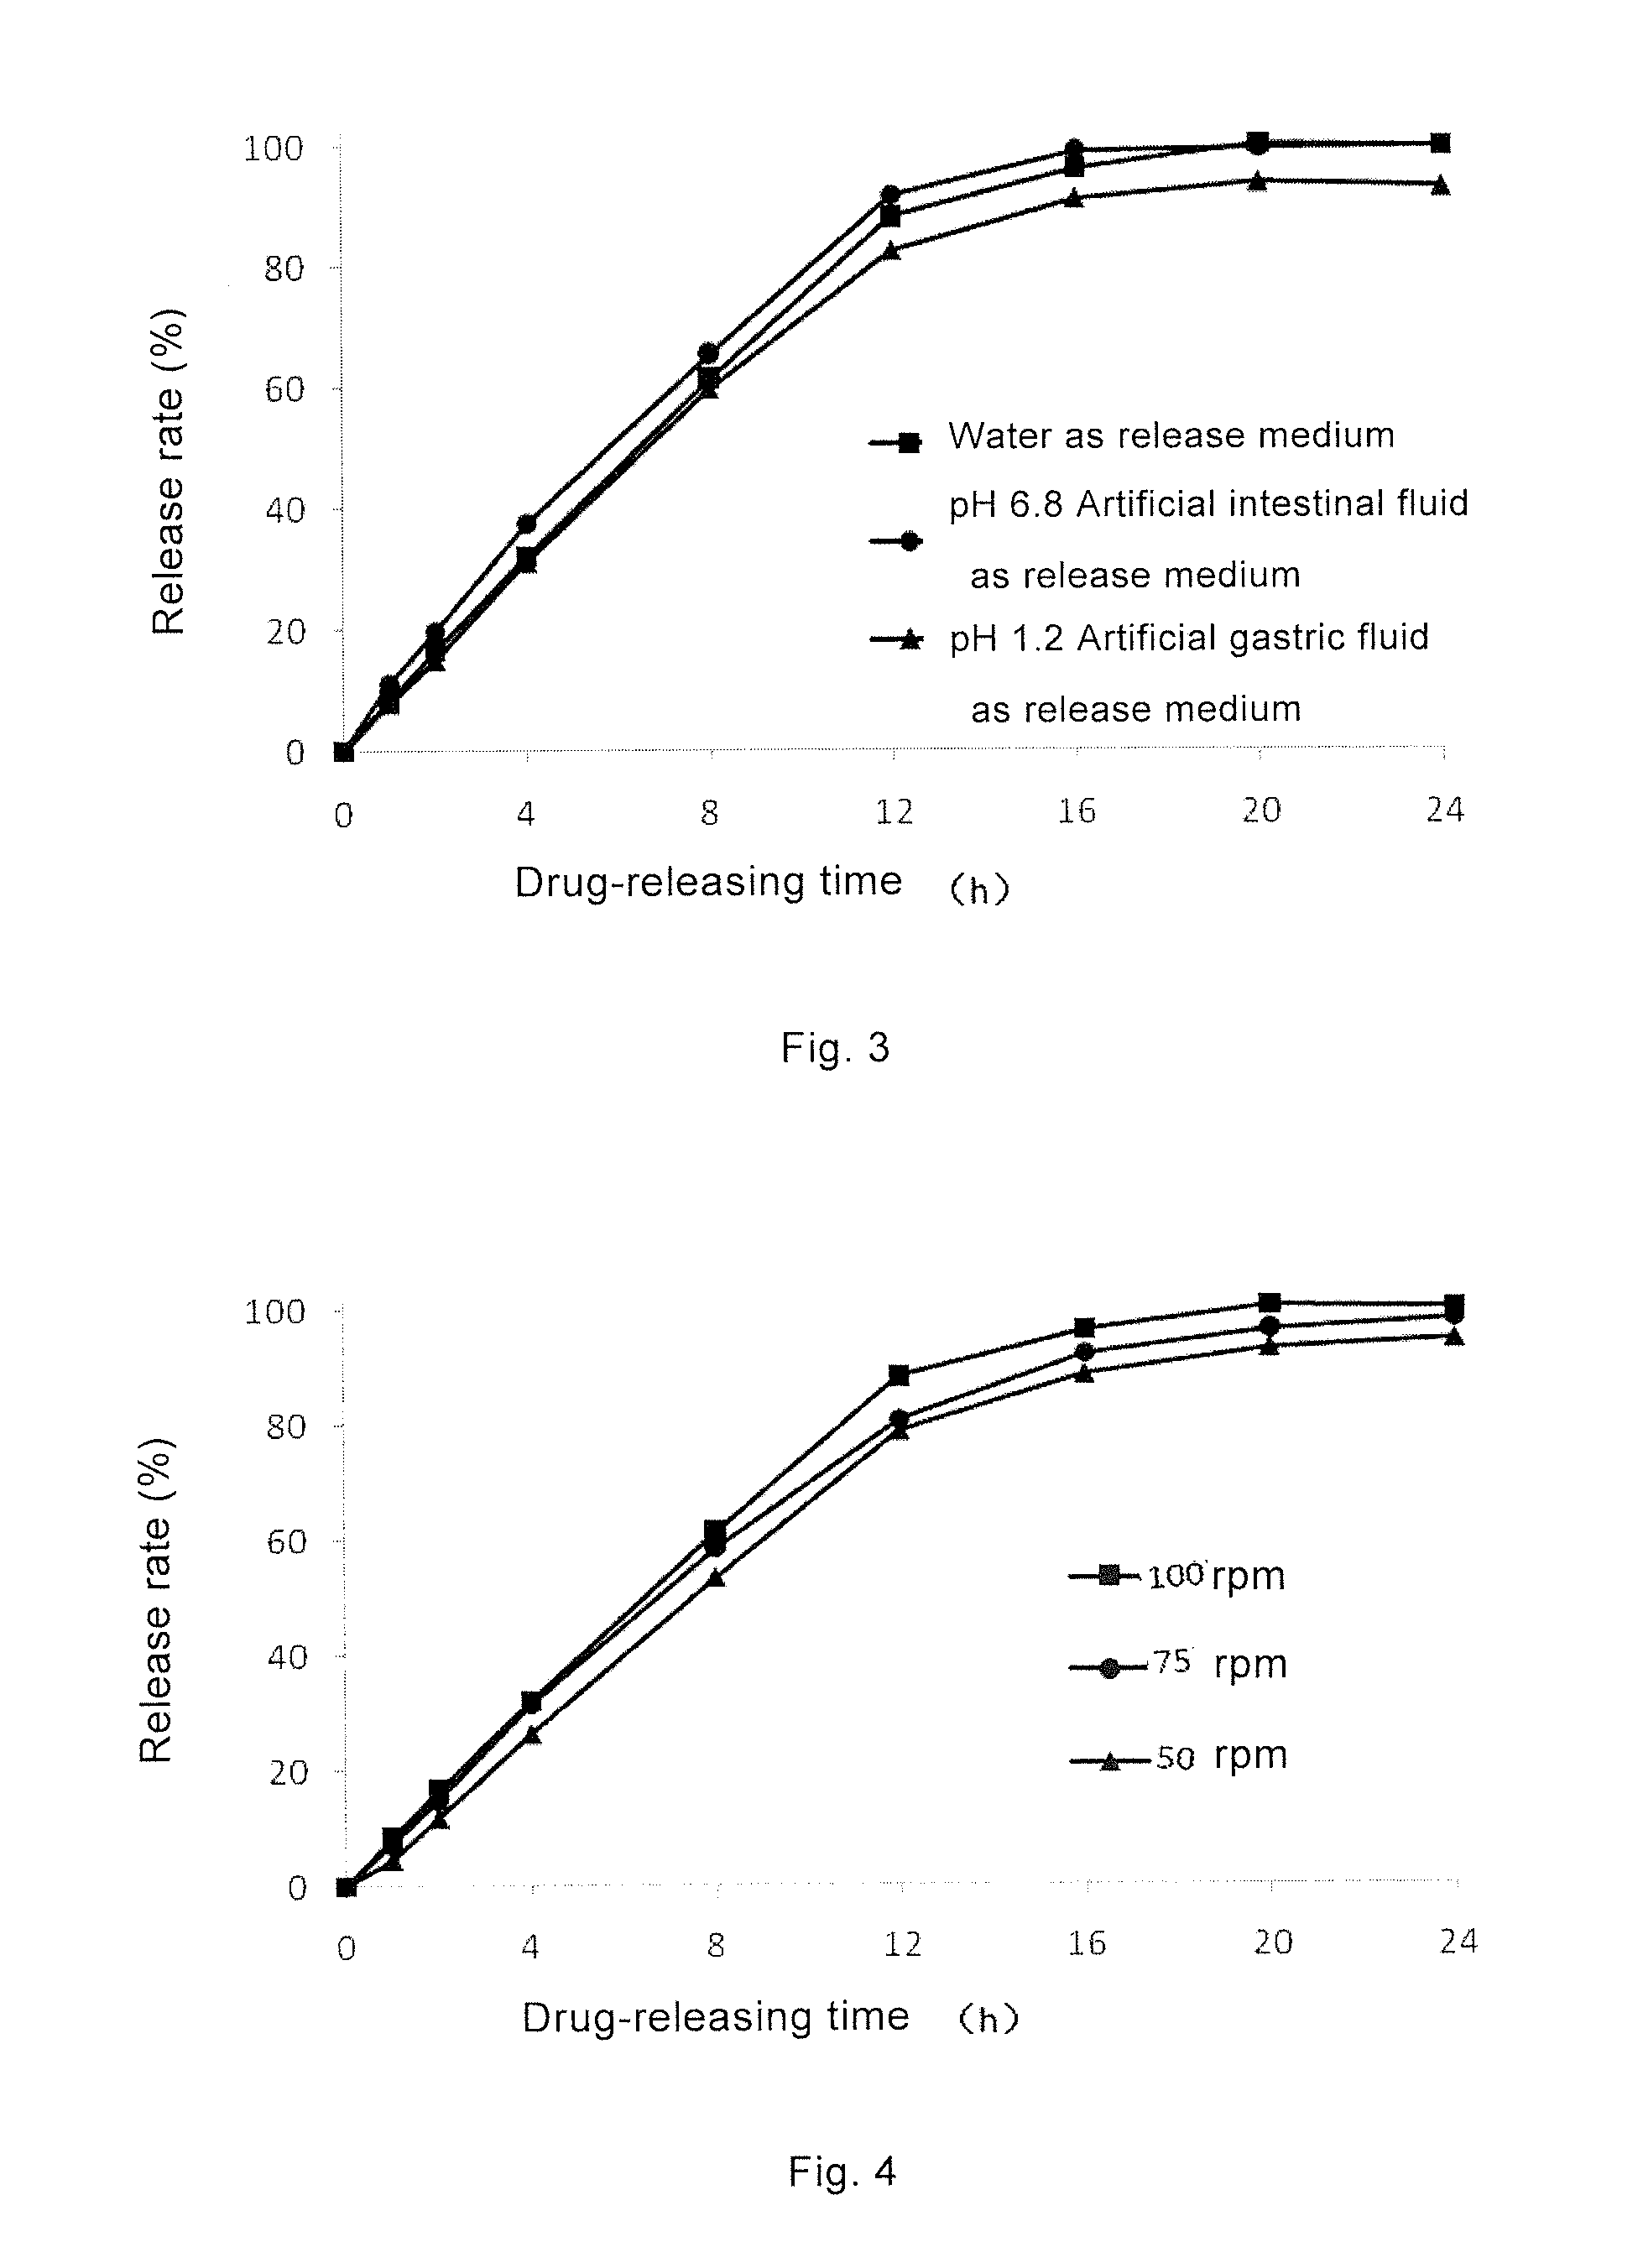 Topiramate Sustained-Release Pharmaceutical Composition, Method for Preparing Same, and Uses Thereof